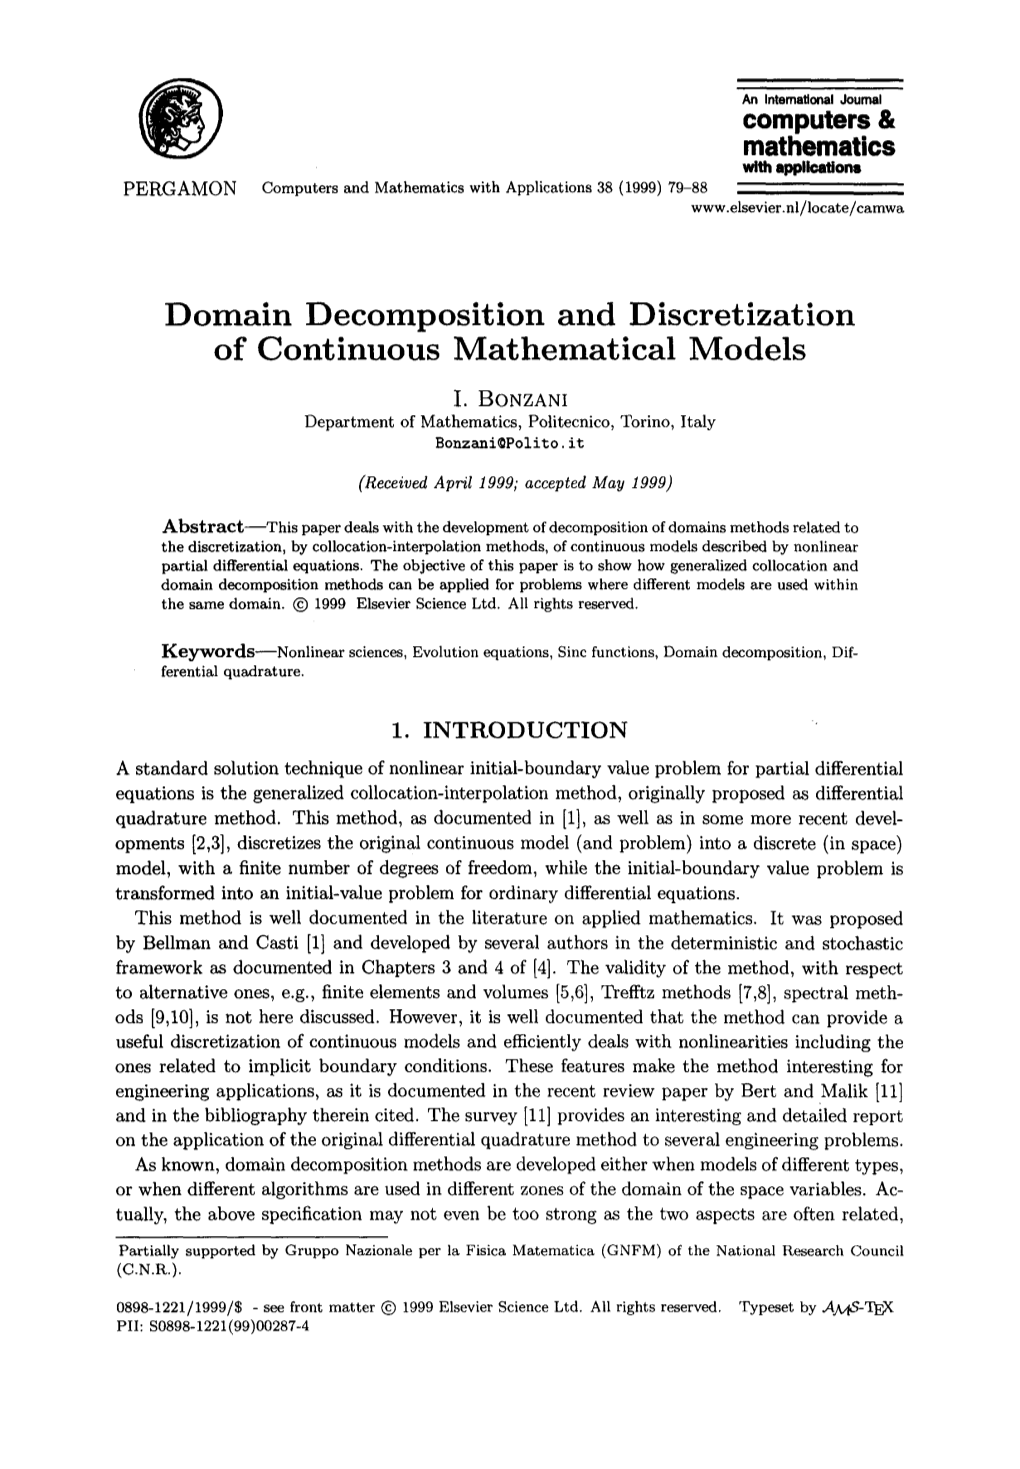 Domain Decomposition and Discretization of Continuous Mathematical Models